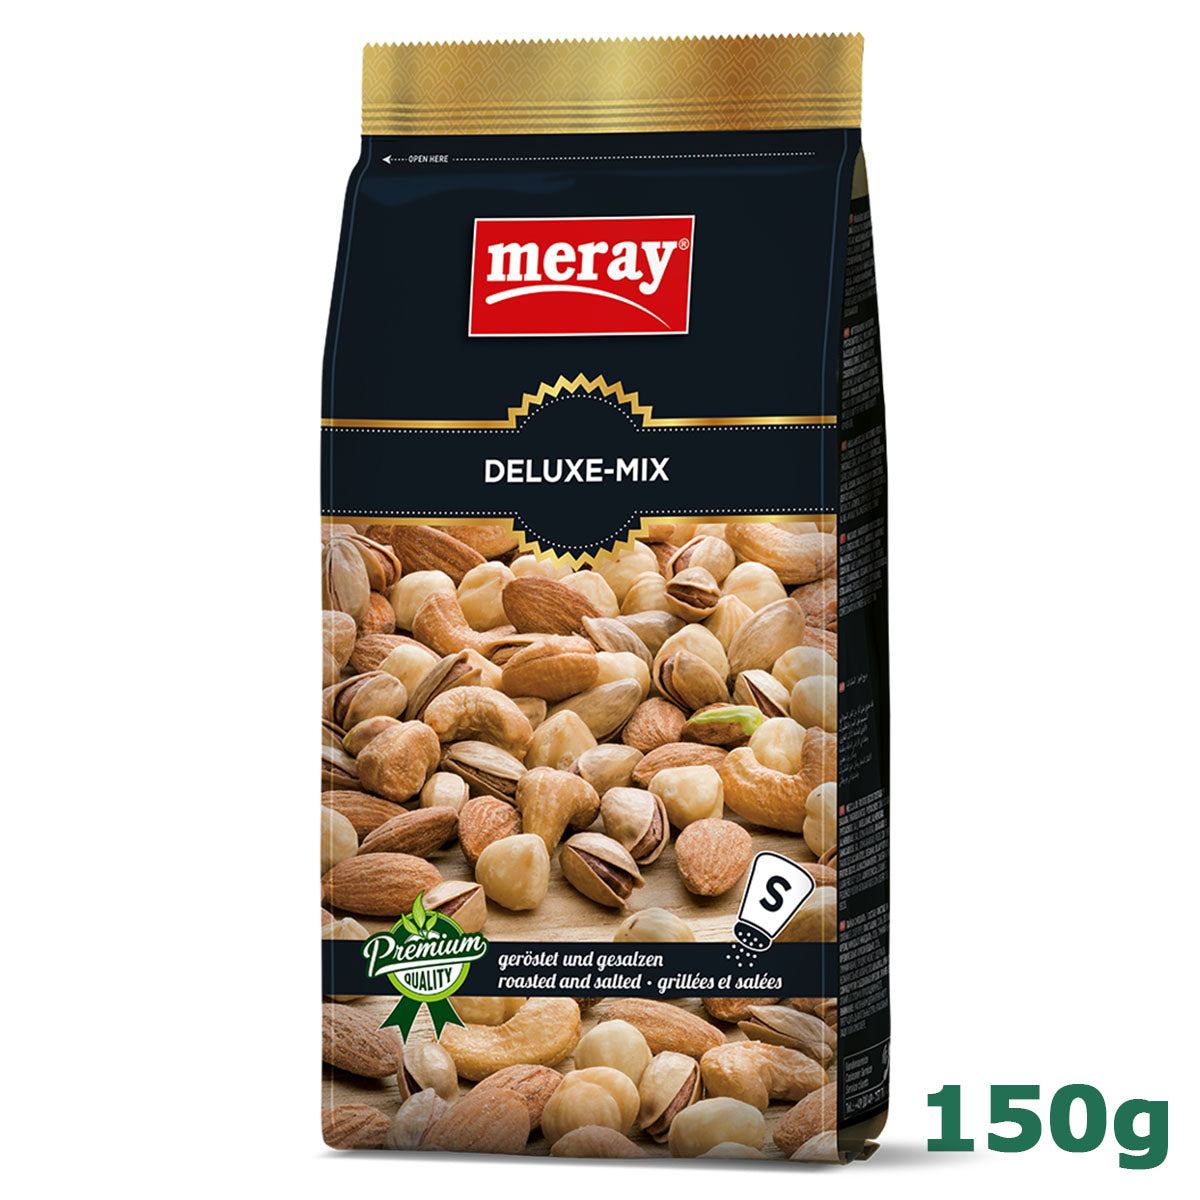 Meray - Deluxe Mix Nuts (150g) - a luxurious snacking treat.